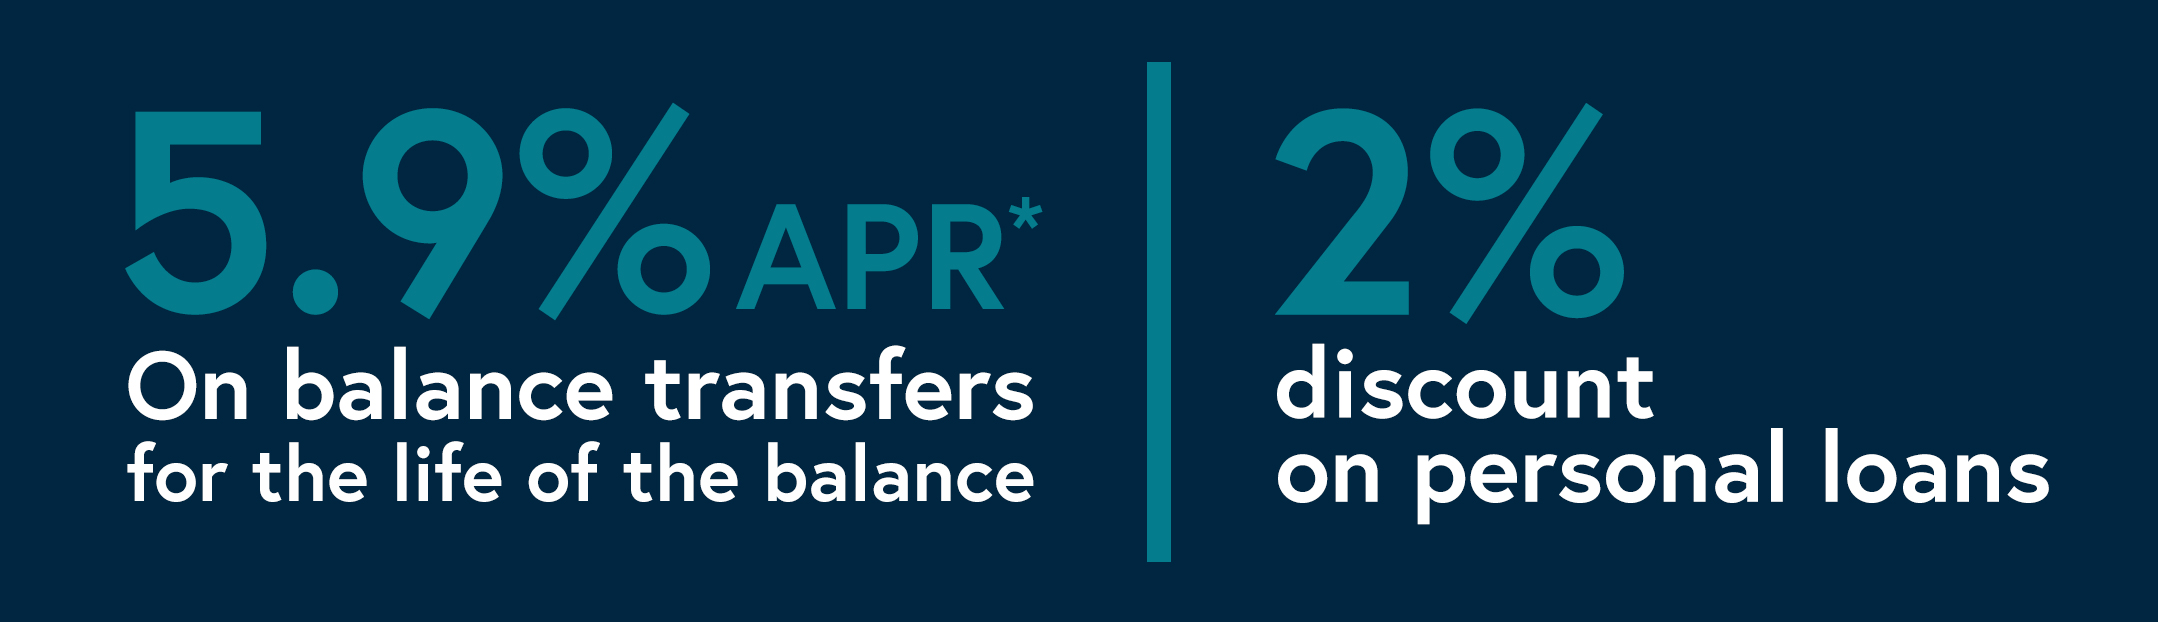 5.9% apr on balance transfers for the life of the balance, or 2% discount on personal loans